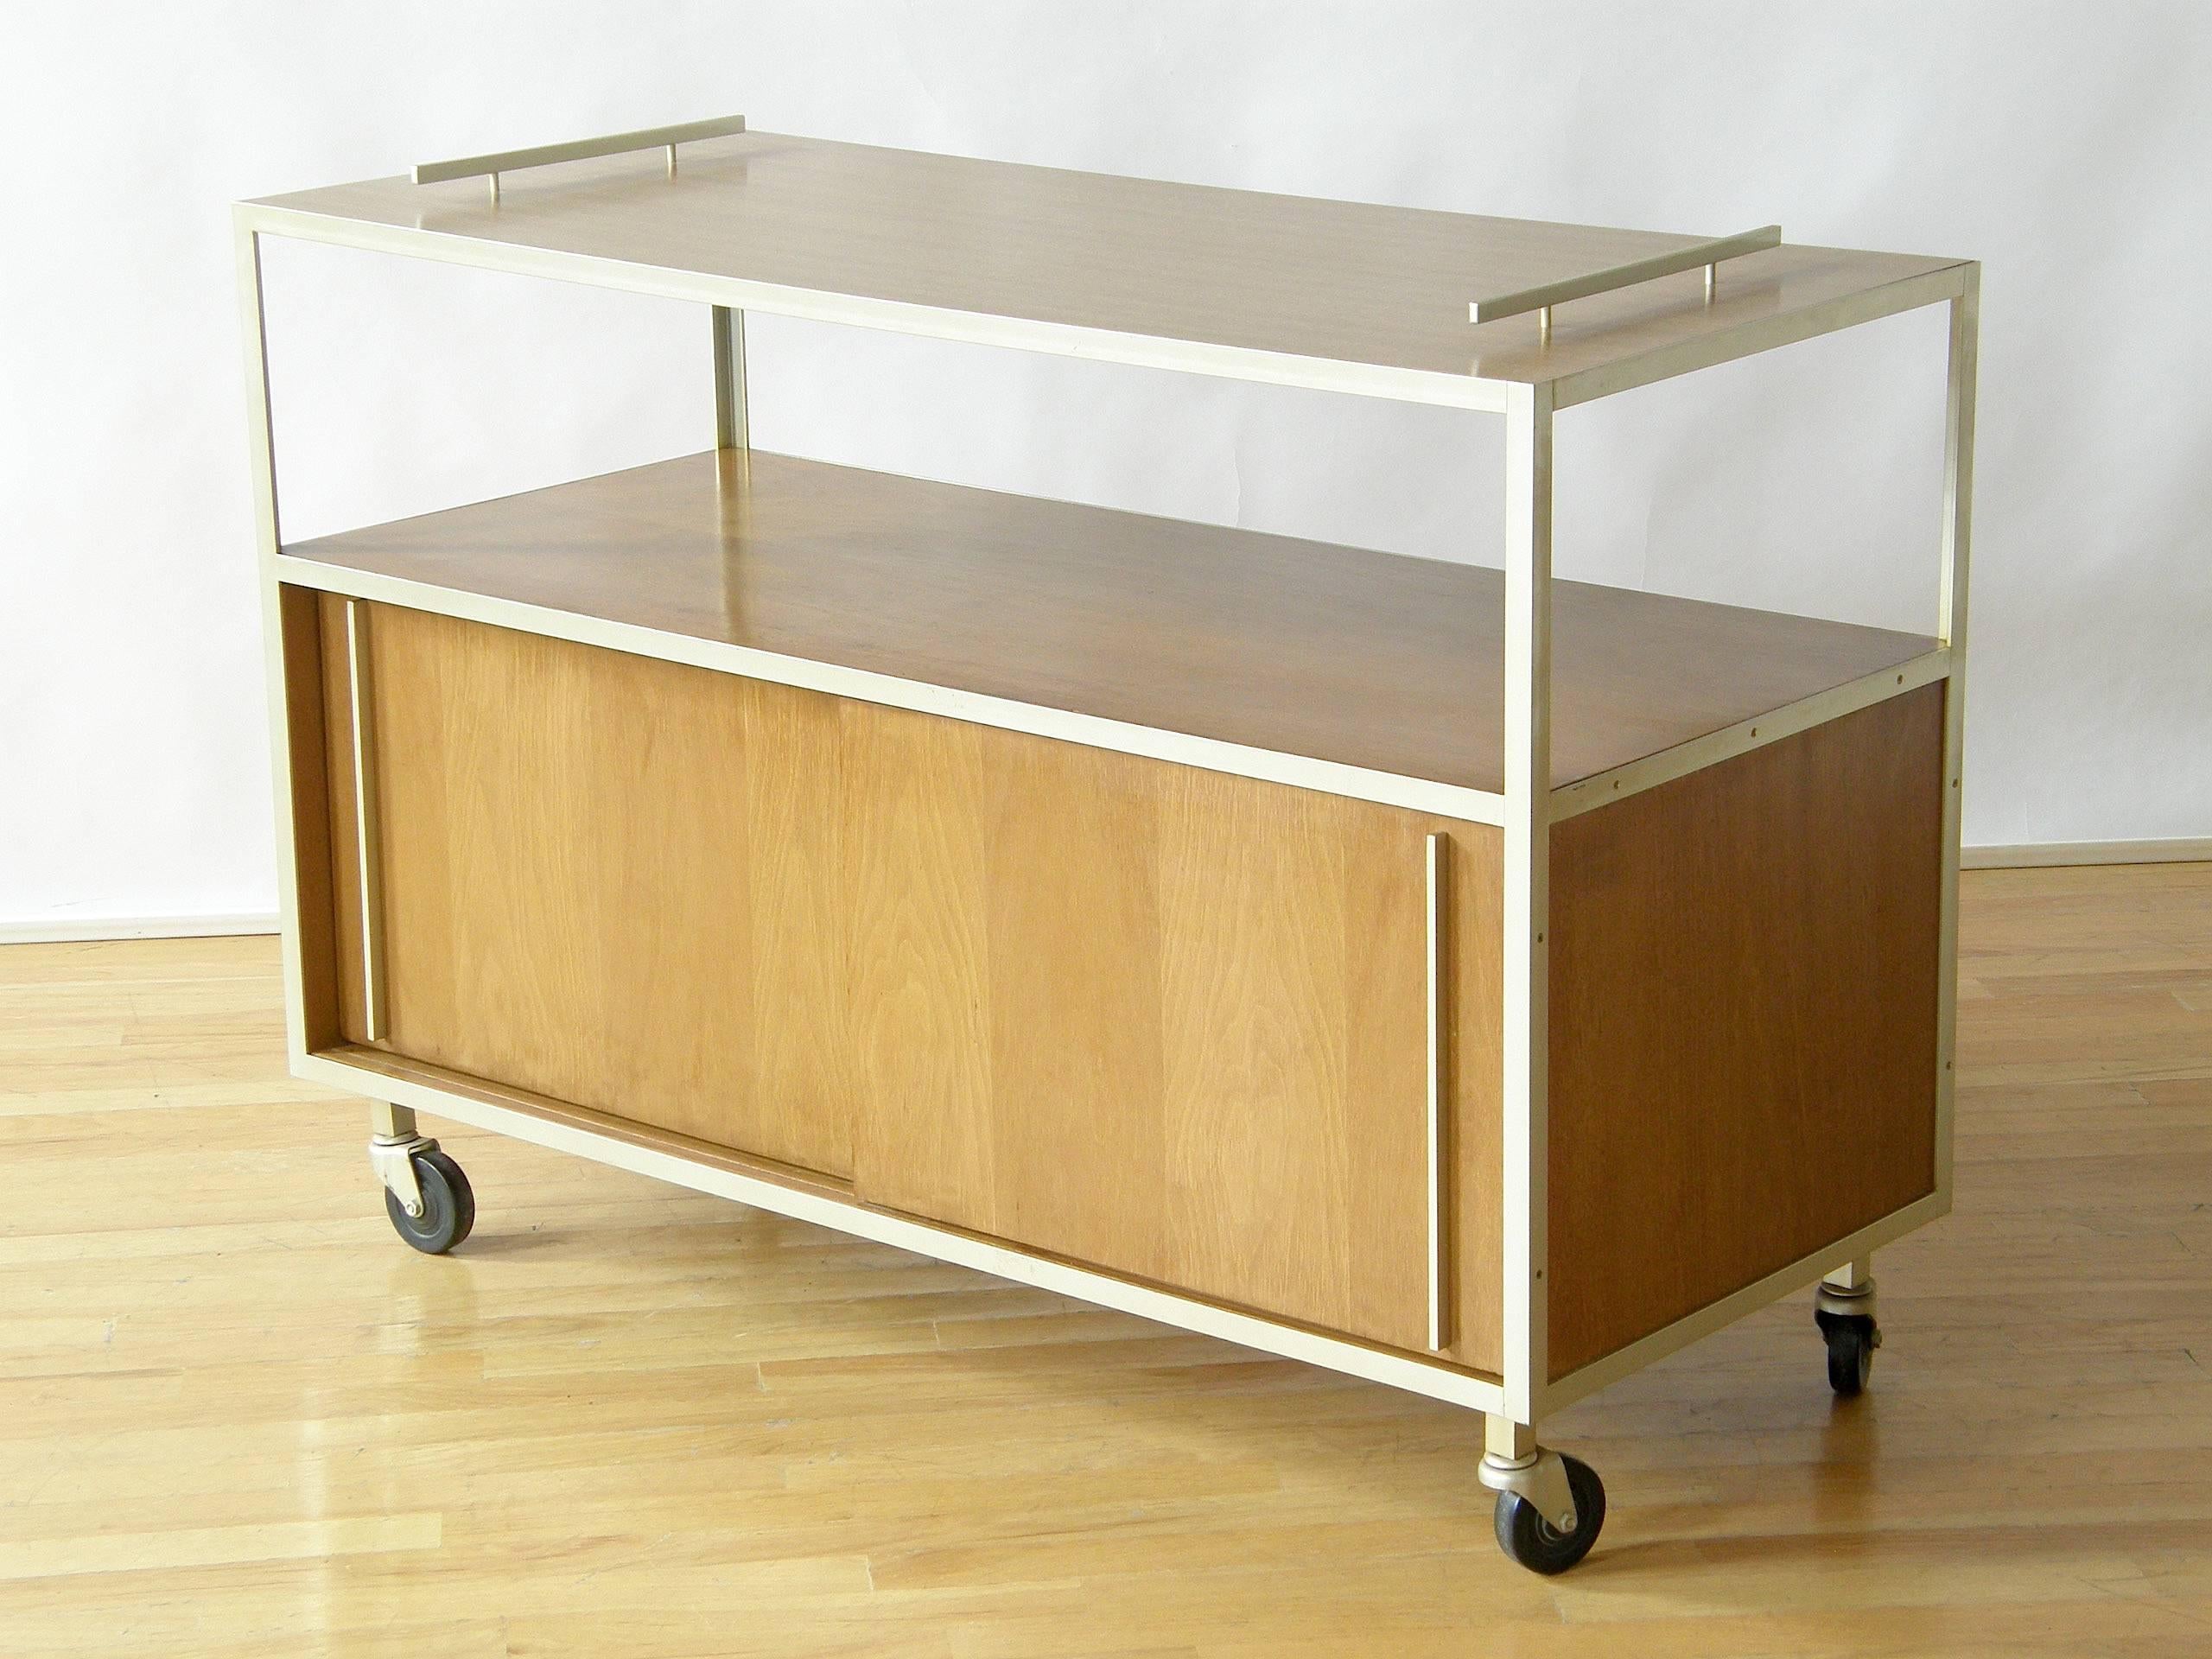 Utilitarian, late 1950s serving cart with a laminated top surface for protection against spillage, an open shelf below that and a large, closed storage area in the bottom section with sliding doors.

Please contact us if you have any questions.